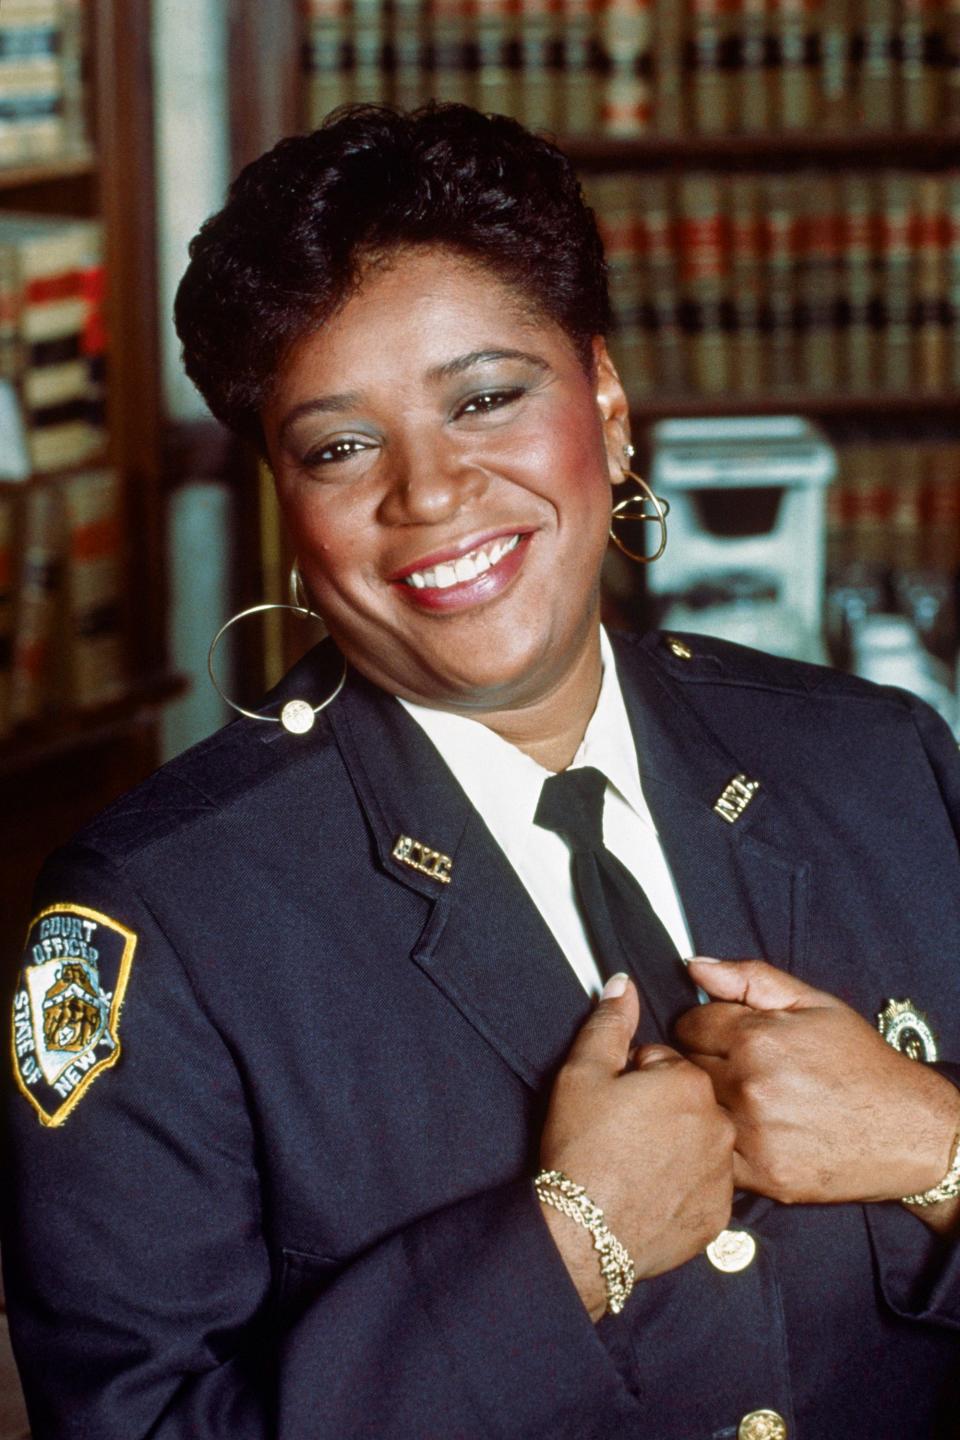 Marsha Warfield as Rosalind 'Roz' Russell in the original "Night Court."